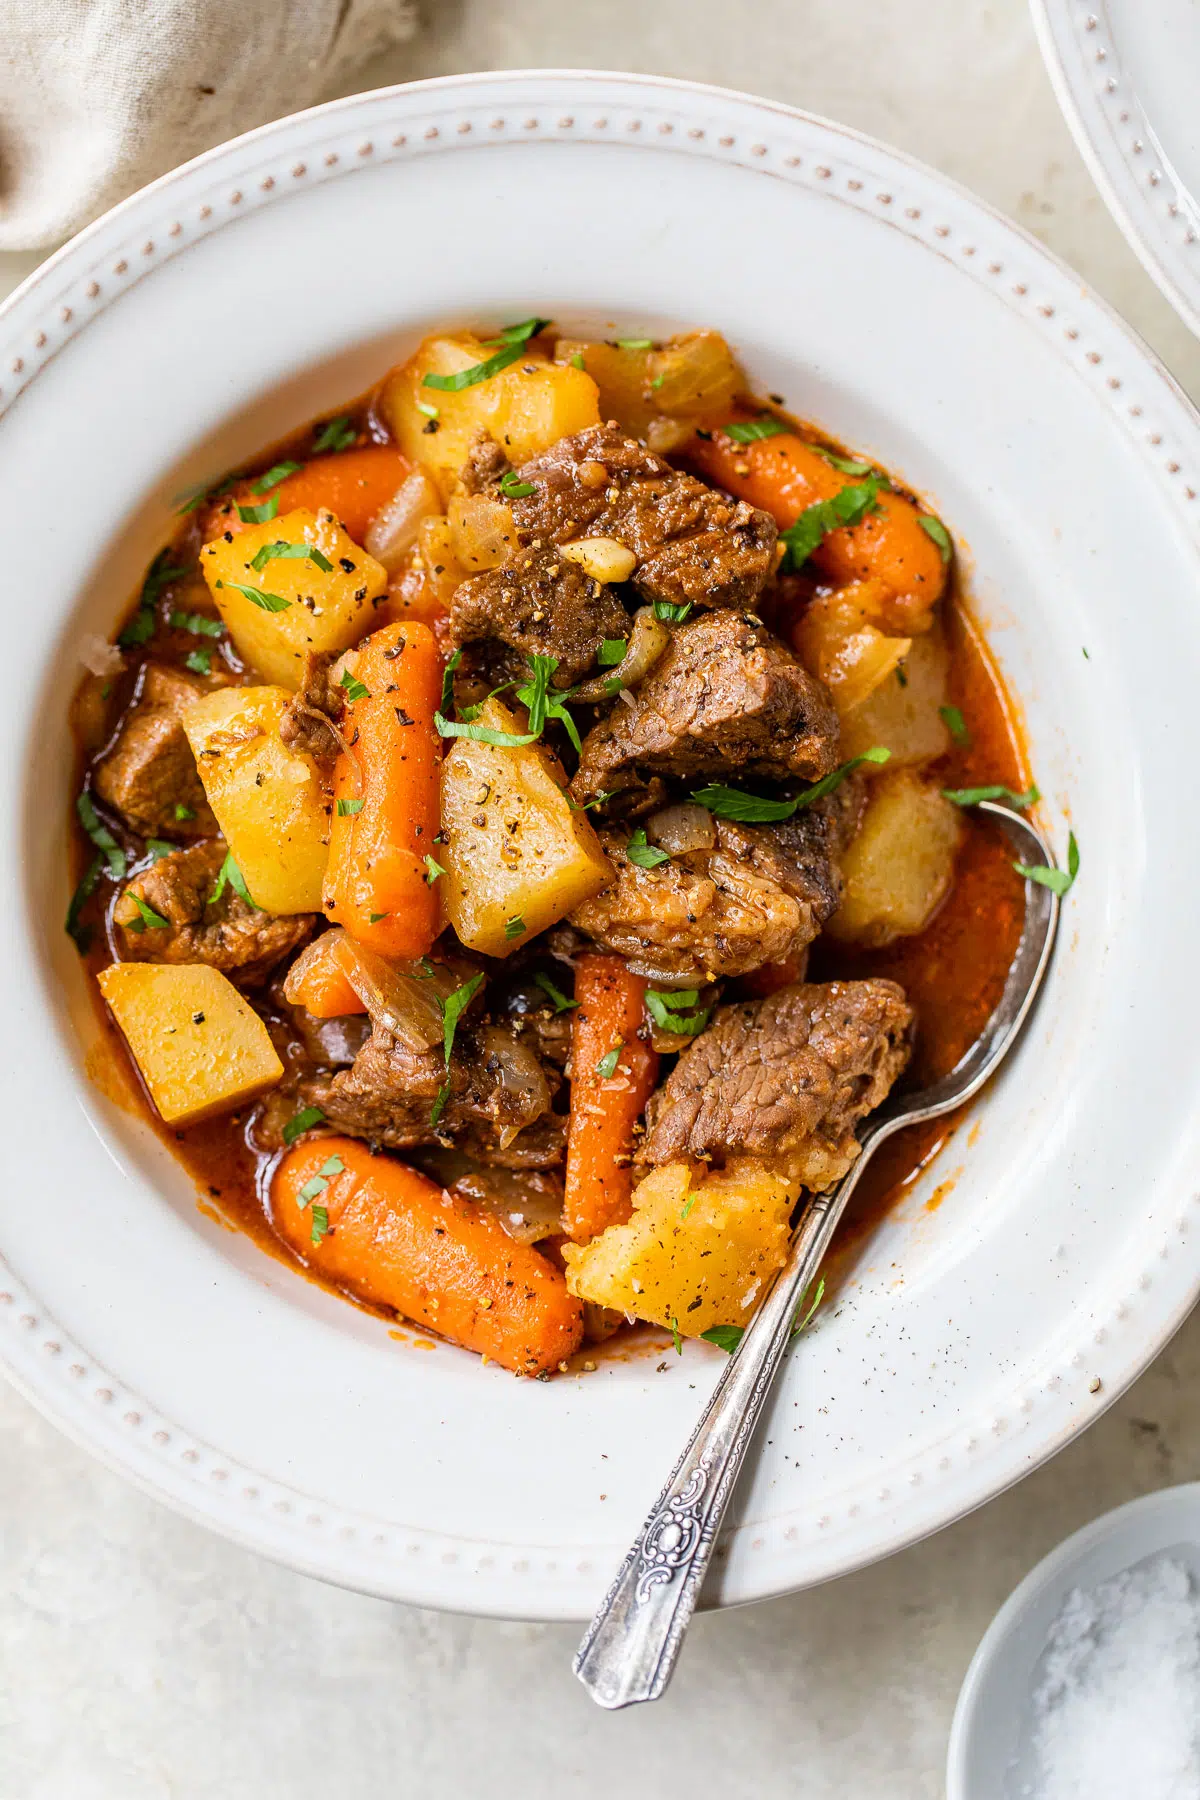 Chuck steak recipes: Delicious beef stew made with tender pieces of chuck steak, accompanied by hearty potatoes and vibrant carrots, presented impeccably in a white bowl.